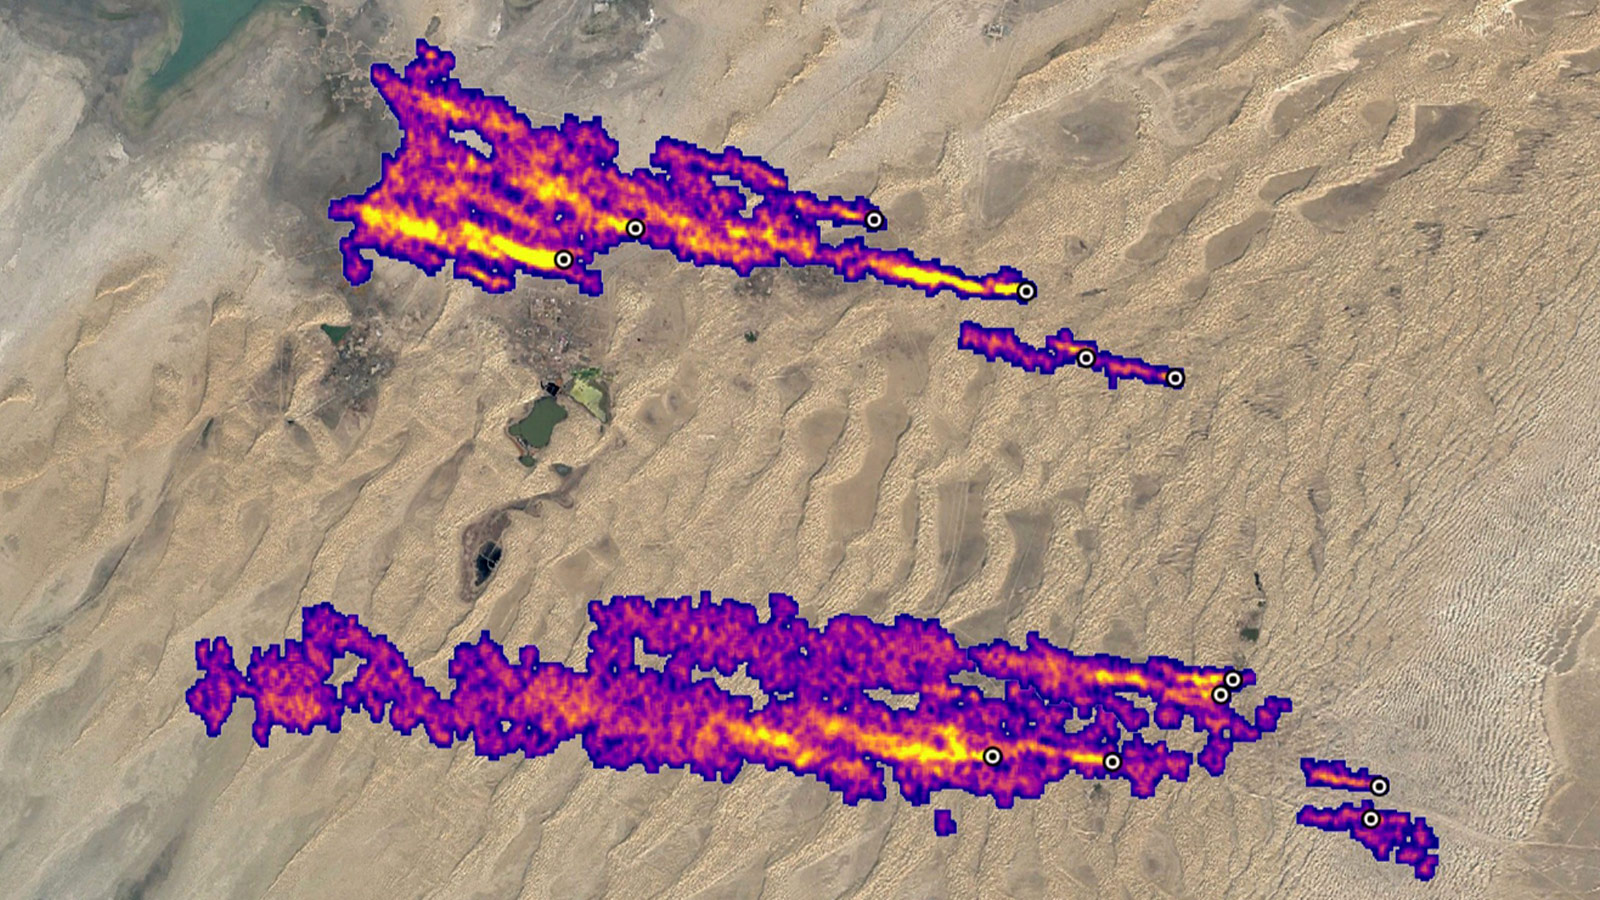 East of Hazar, Turkmenistan, a port city on the Caspian Sea, 12 plumes of methane stream westward. The plumes were detected by NASA’s Earth Surface Mineral Dust Source Investigation mission and some of them stretch for more than 20 miles (32 kilometers)